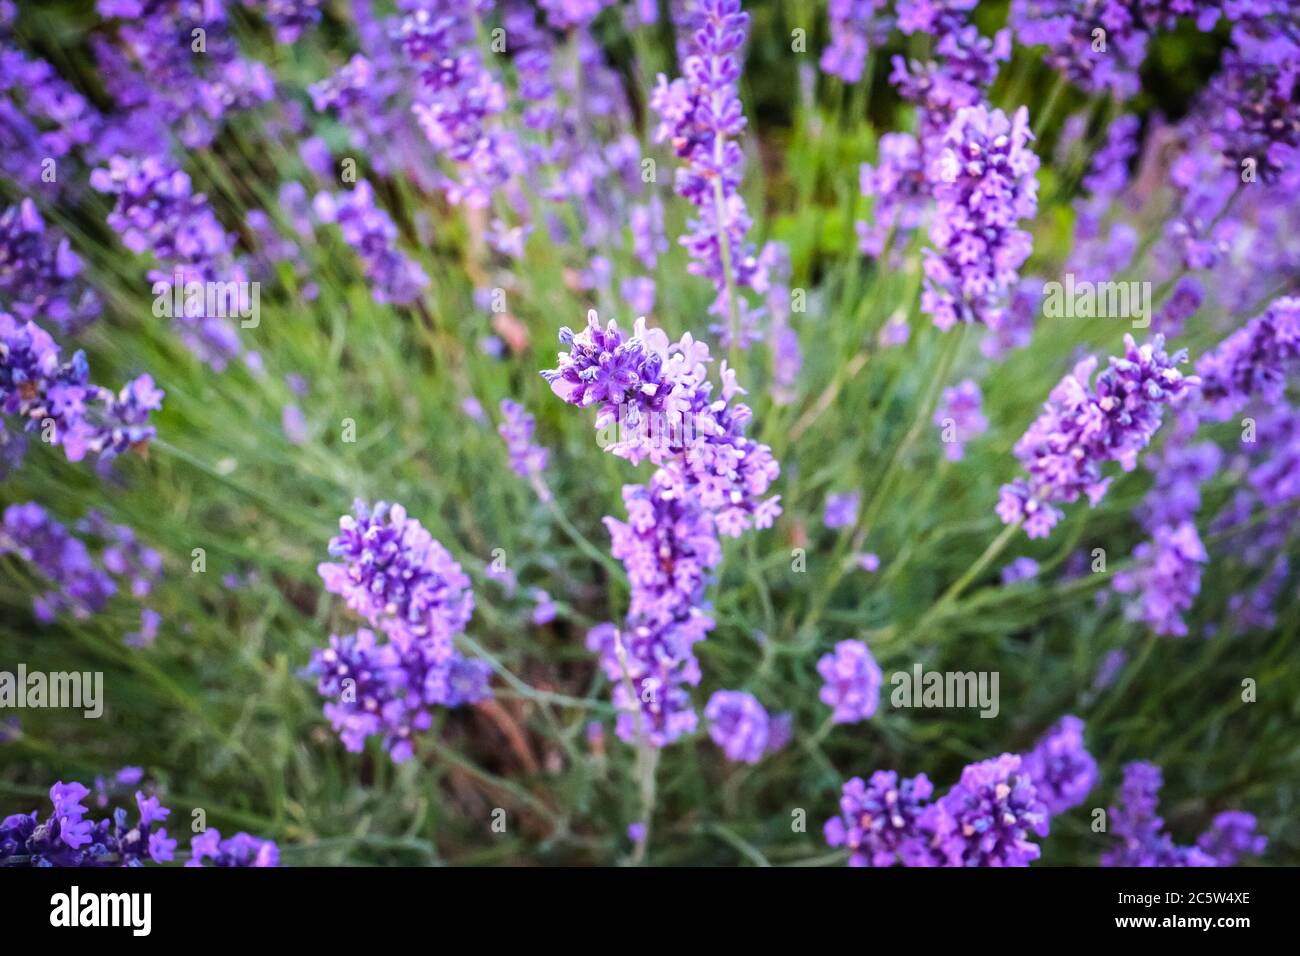 Lavender in bloom. Lavandula angustifolia (True lavender or garden lavender, formerly Lavandula officinalis), is a plant in the family Lamiaceae. Stock Photo